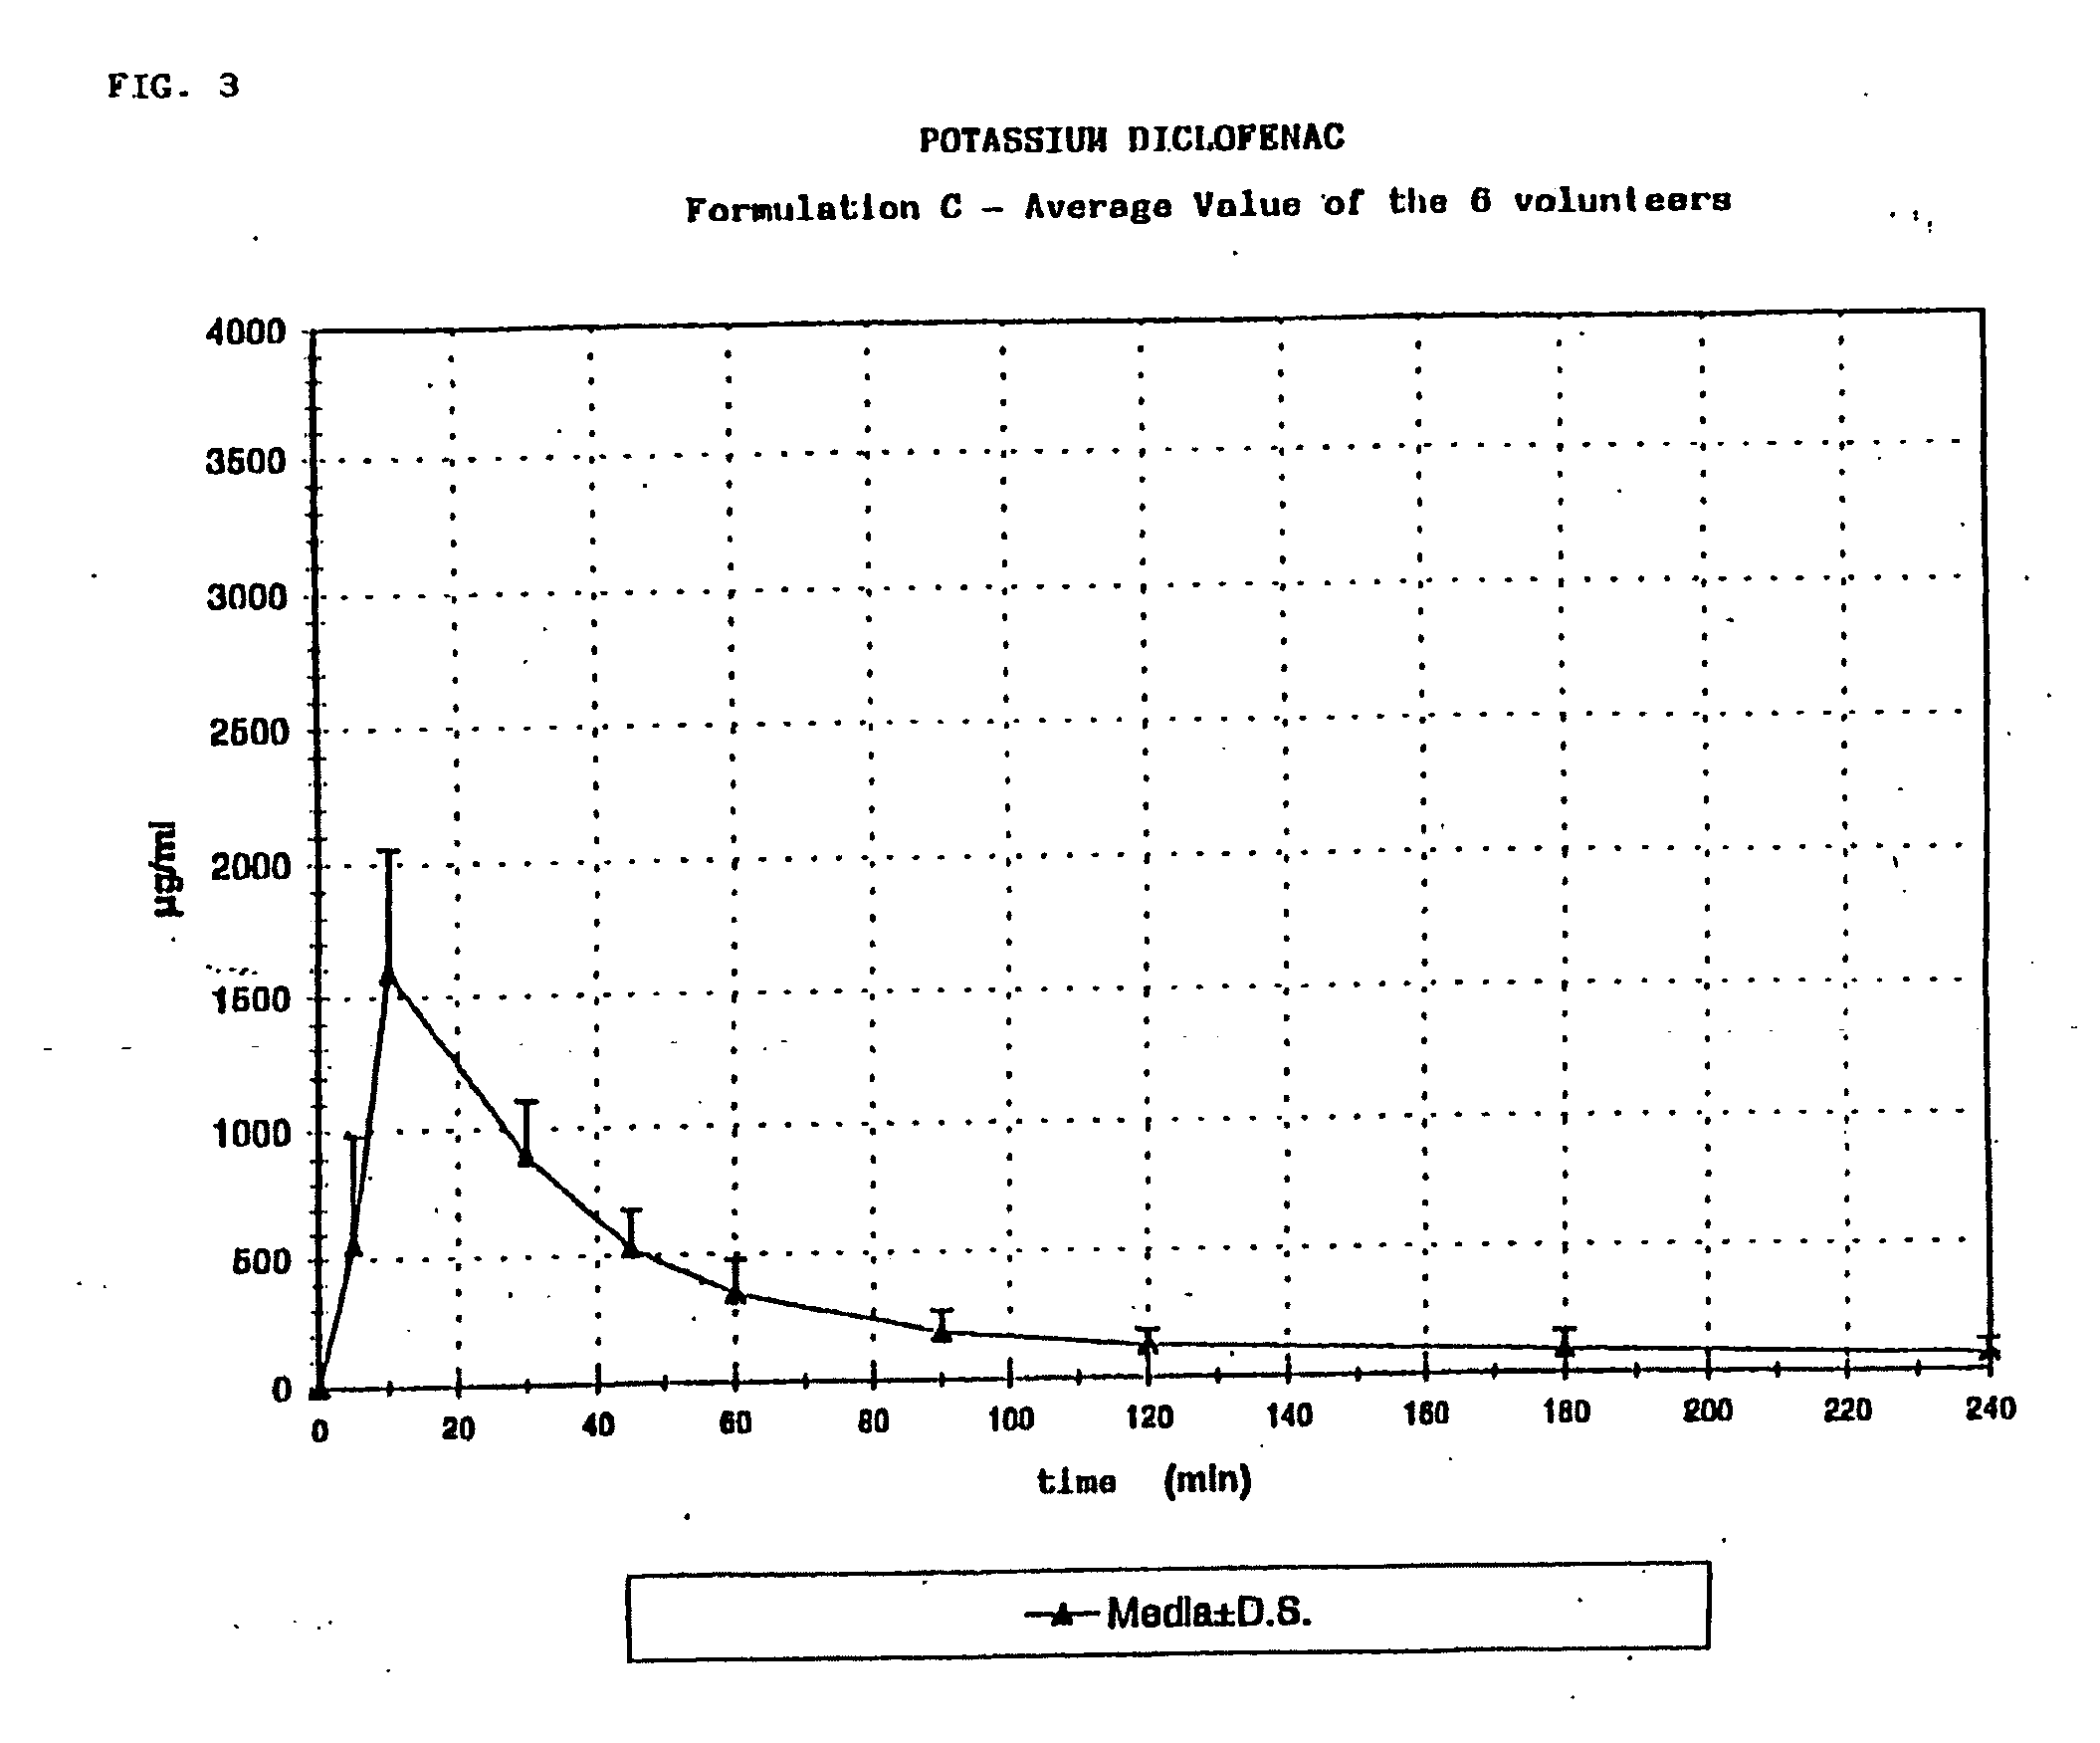 Pharmaceutical compositions and methods of treatment based on diclofenac